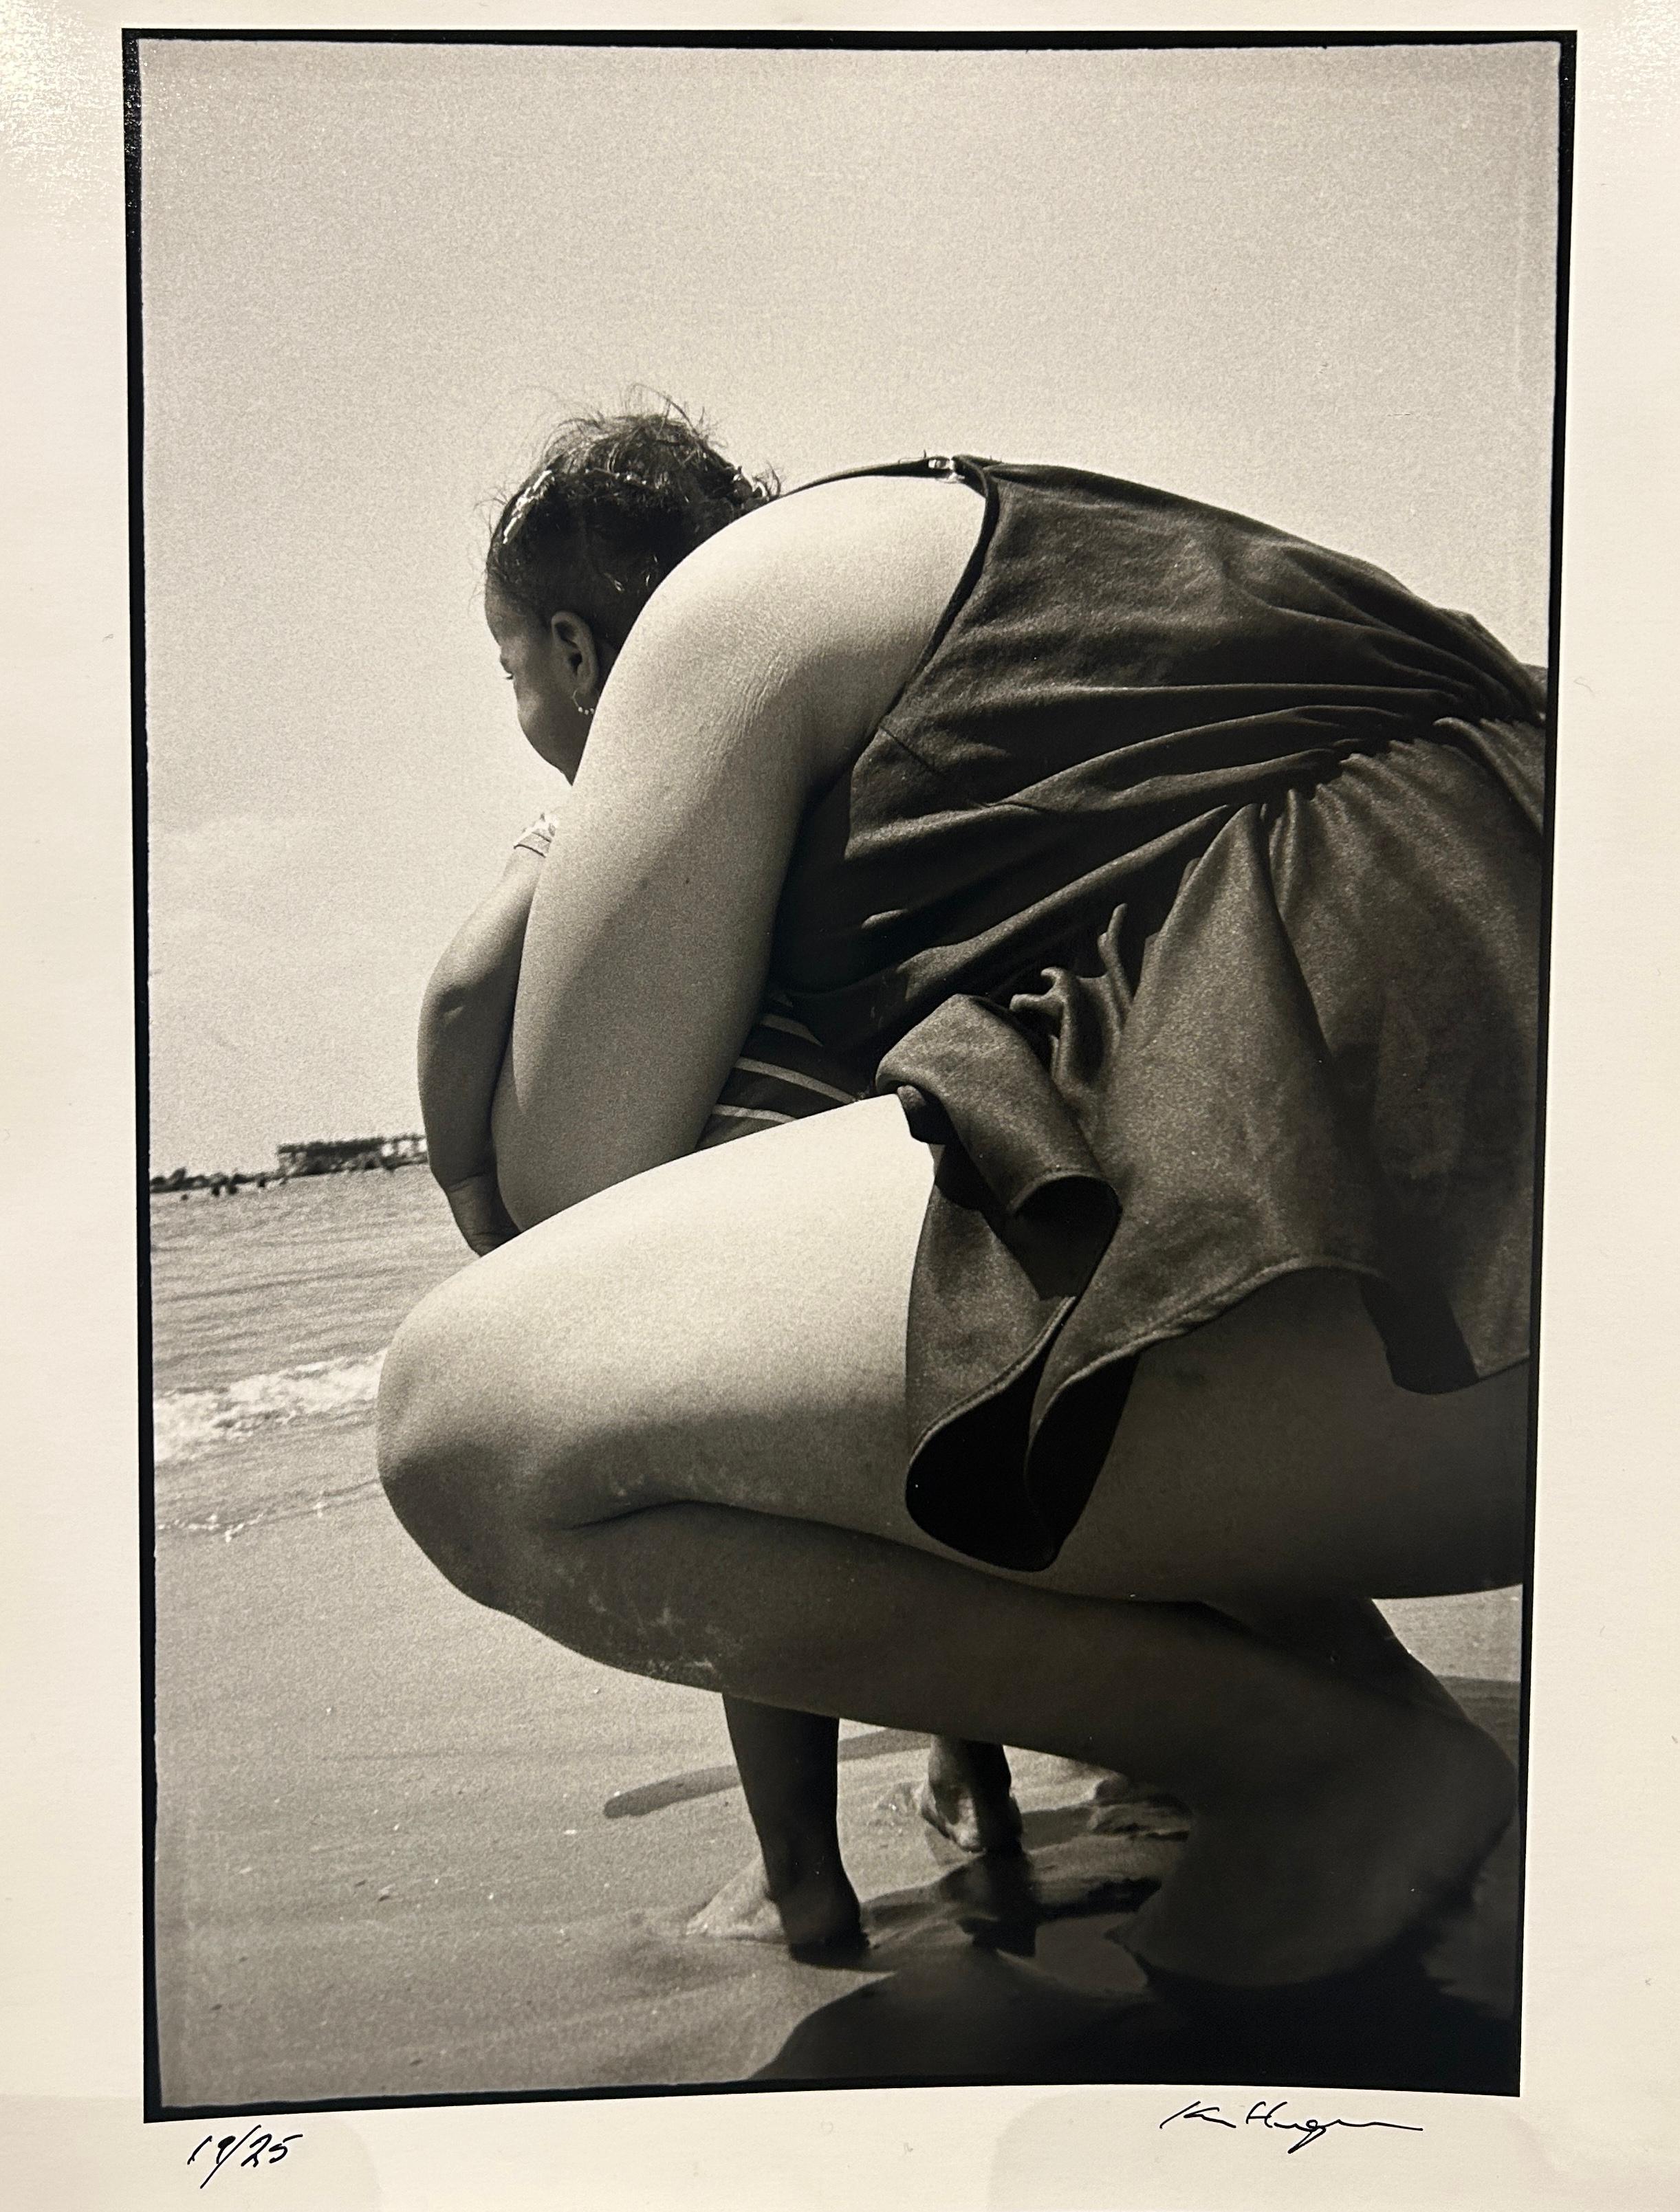 Ken Heyman Black and White Photograph - Woman and Child by the Beach - Hipshot Series